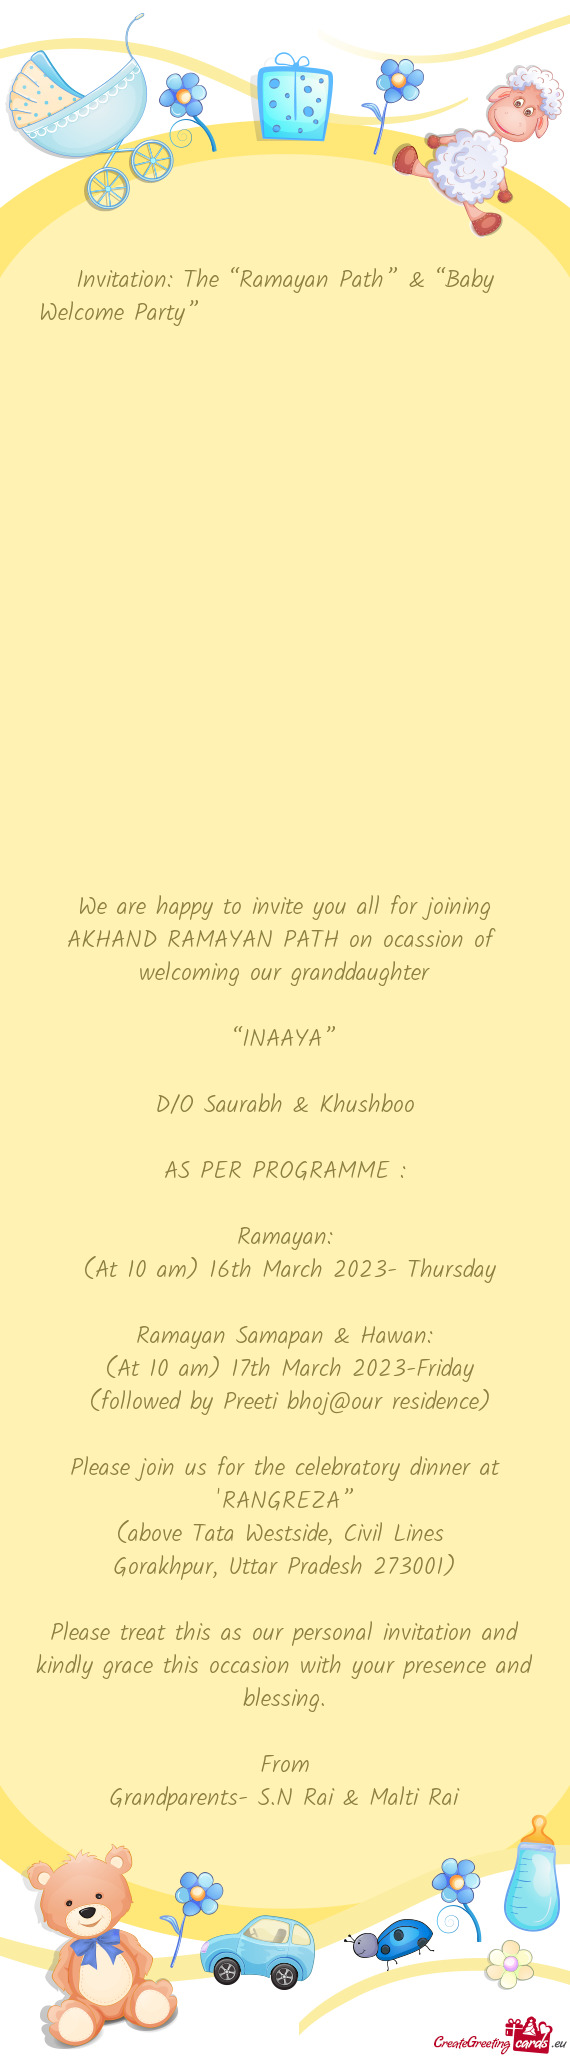 We are happy to invite you all for joining AKHAND RAMAYAN PATH on ocassion of